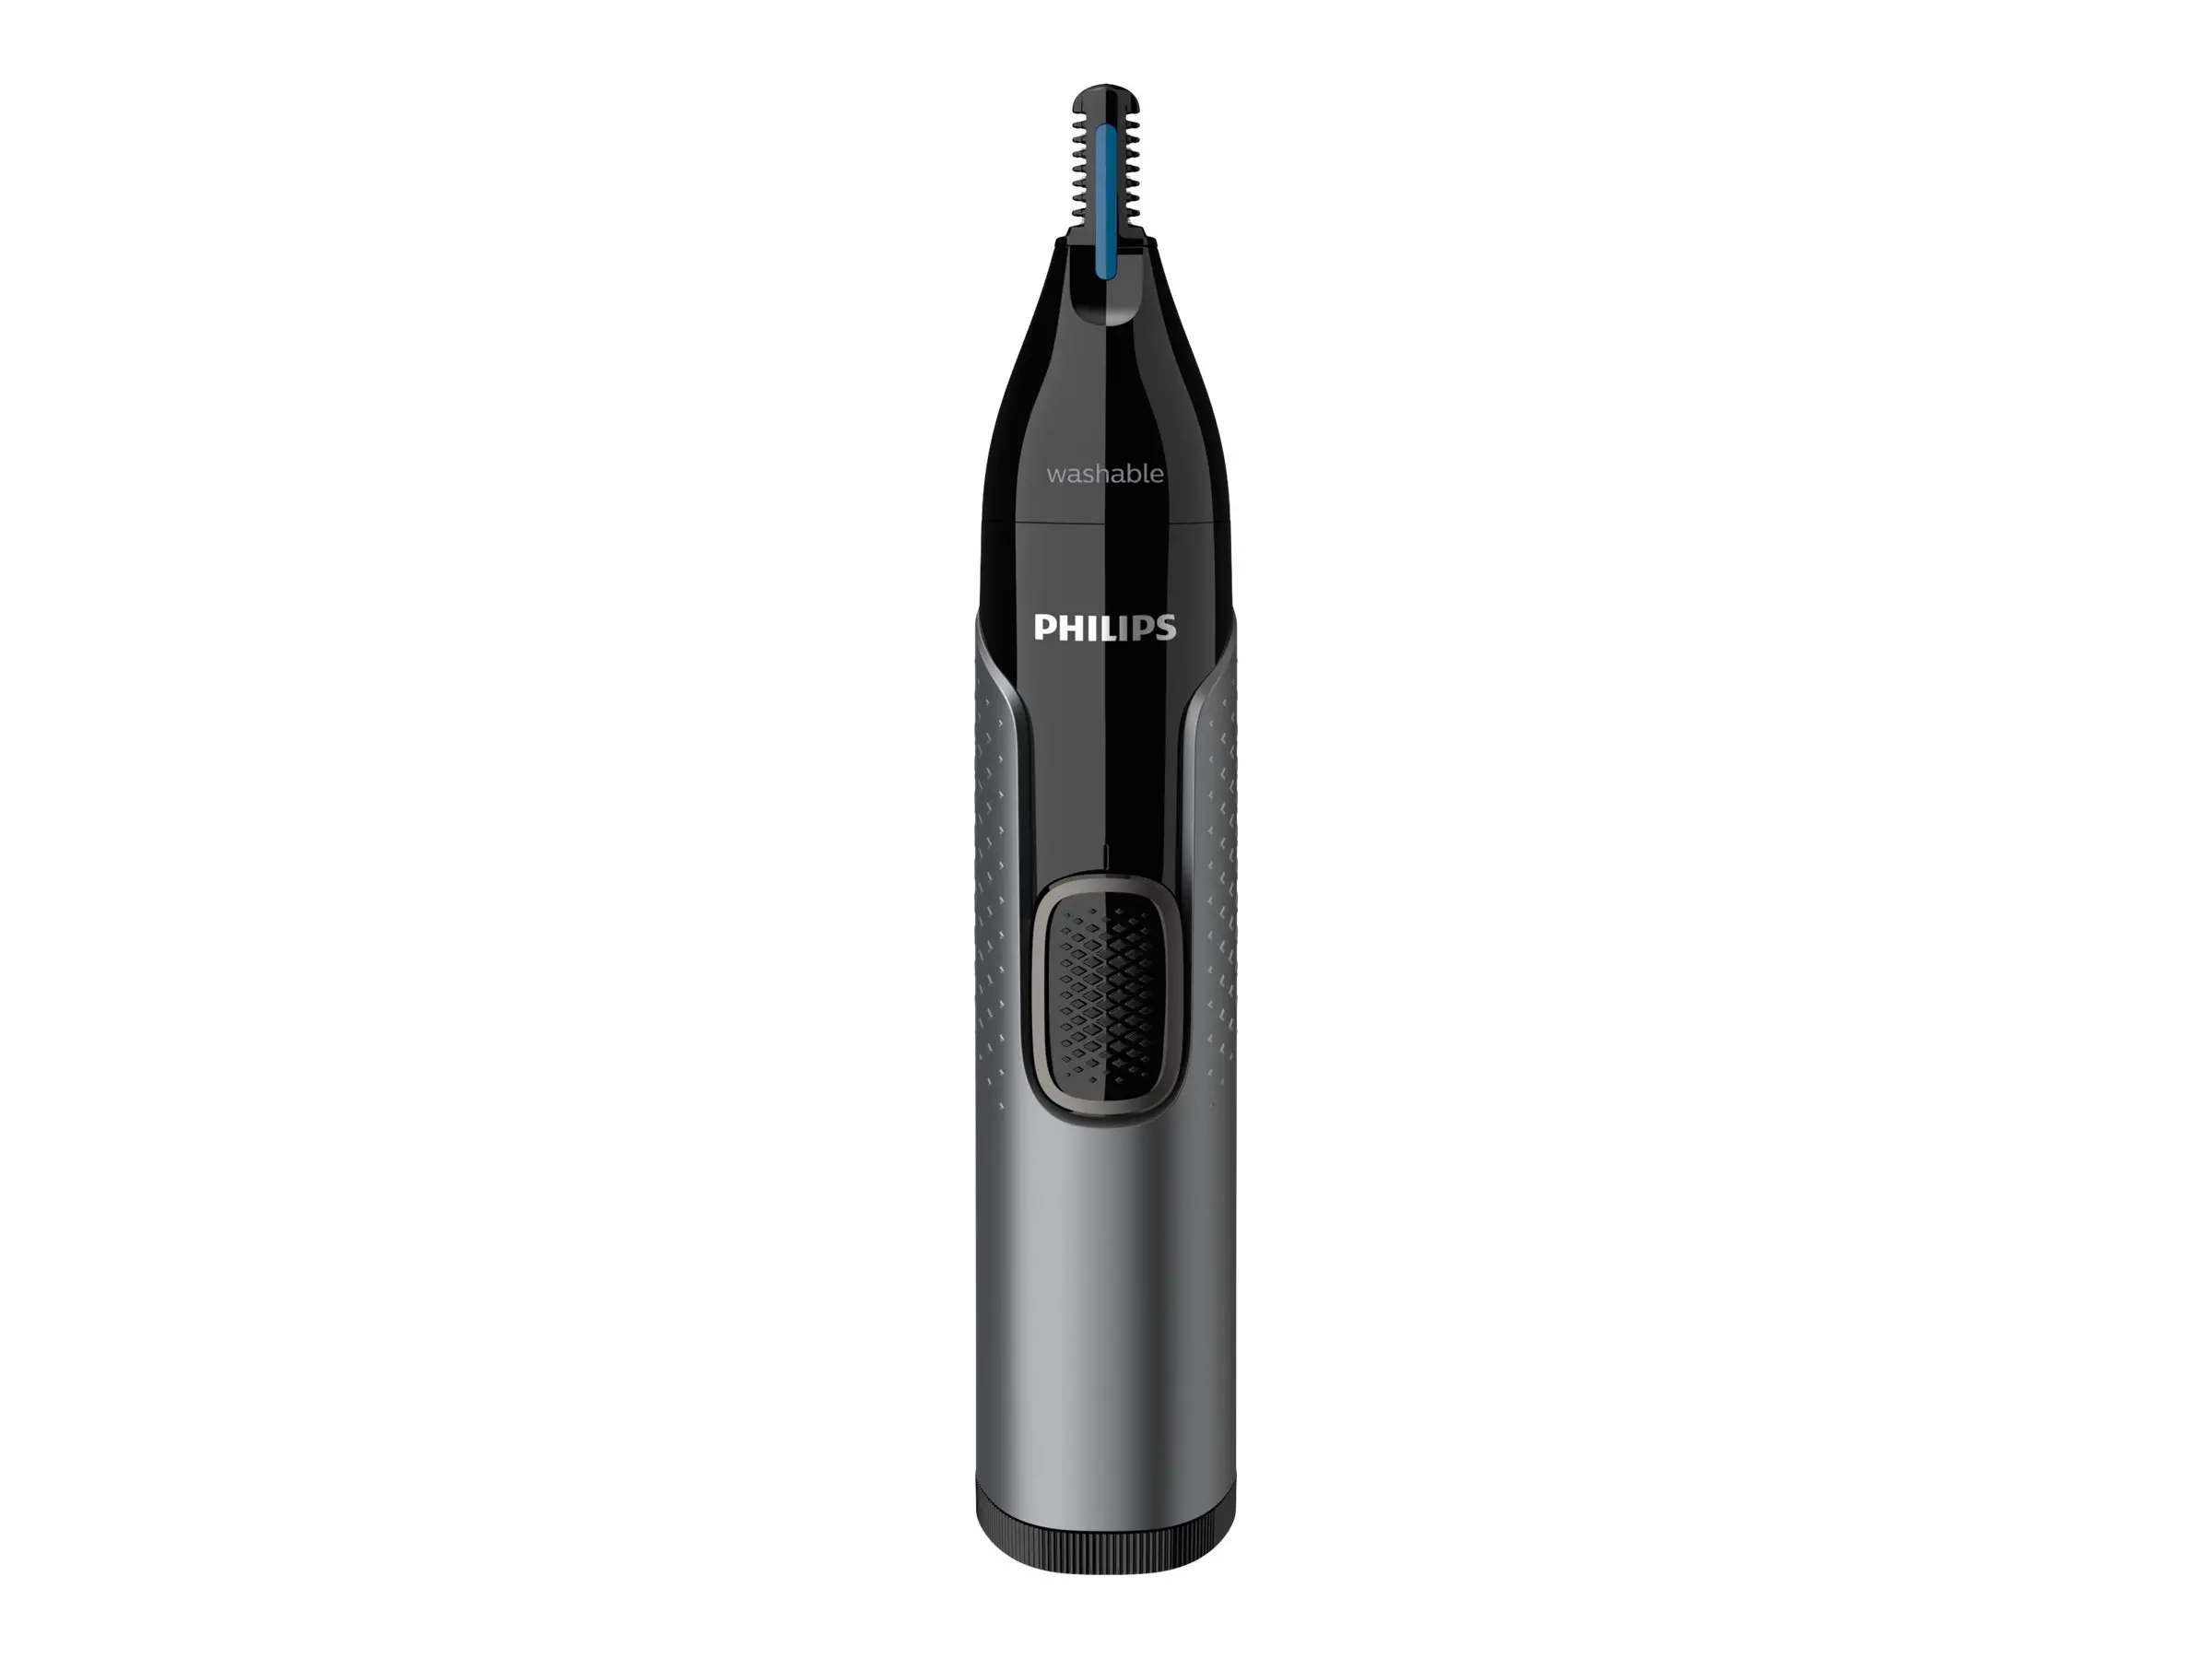 Philips Nose and ear trimmer: 100 waterproof, Dual-sided Protective Guard system, AA-battery included, 2 eyebrow combs 3mm/5mm - image 7